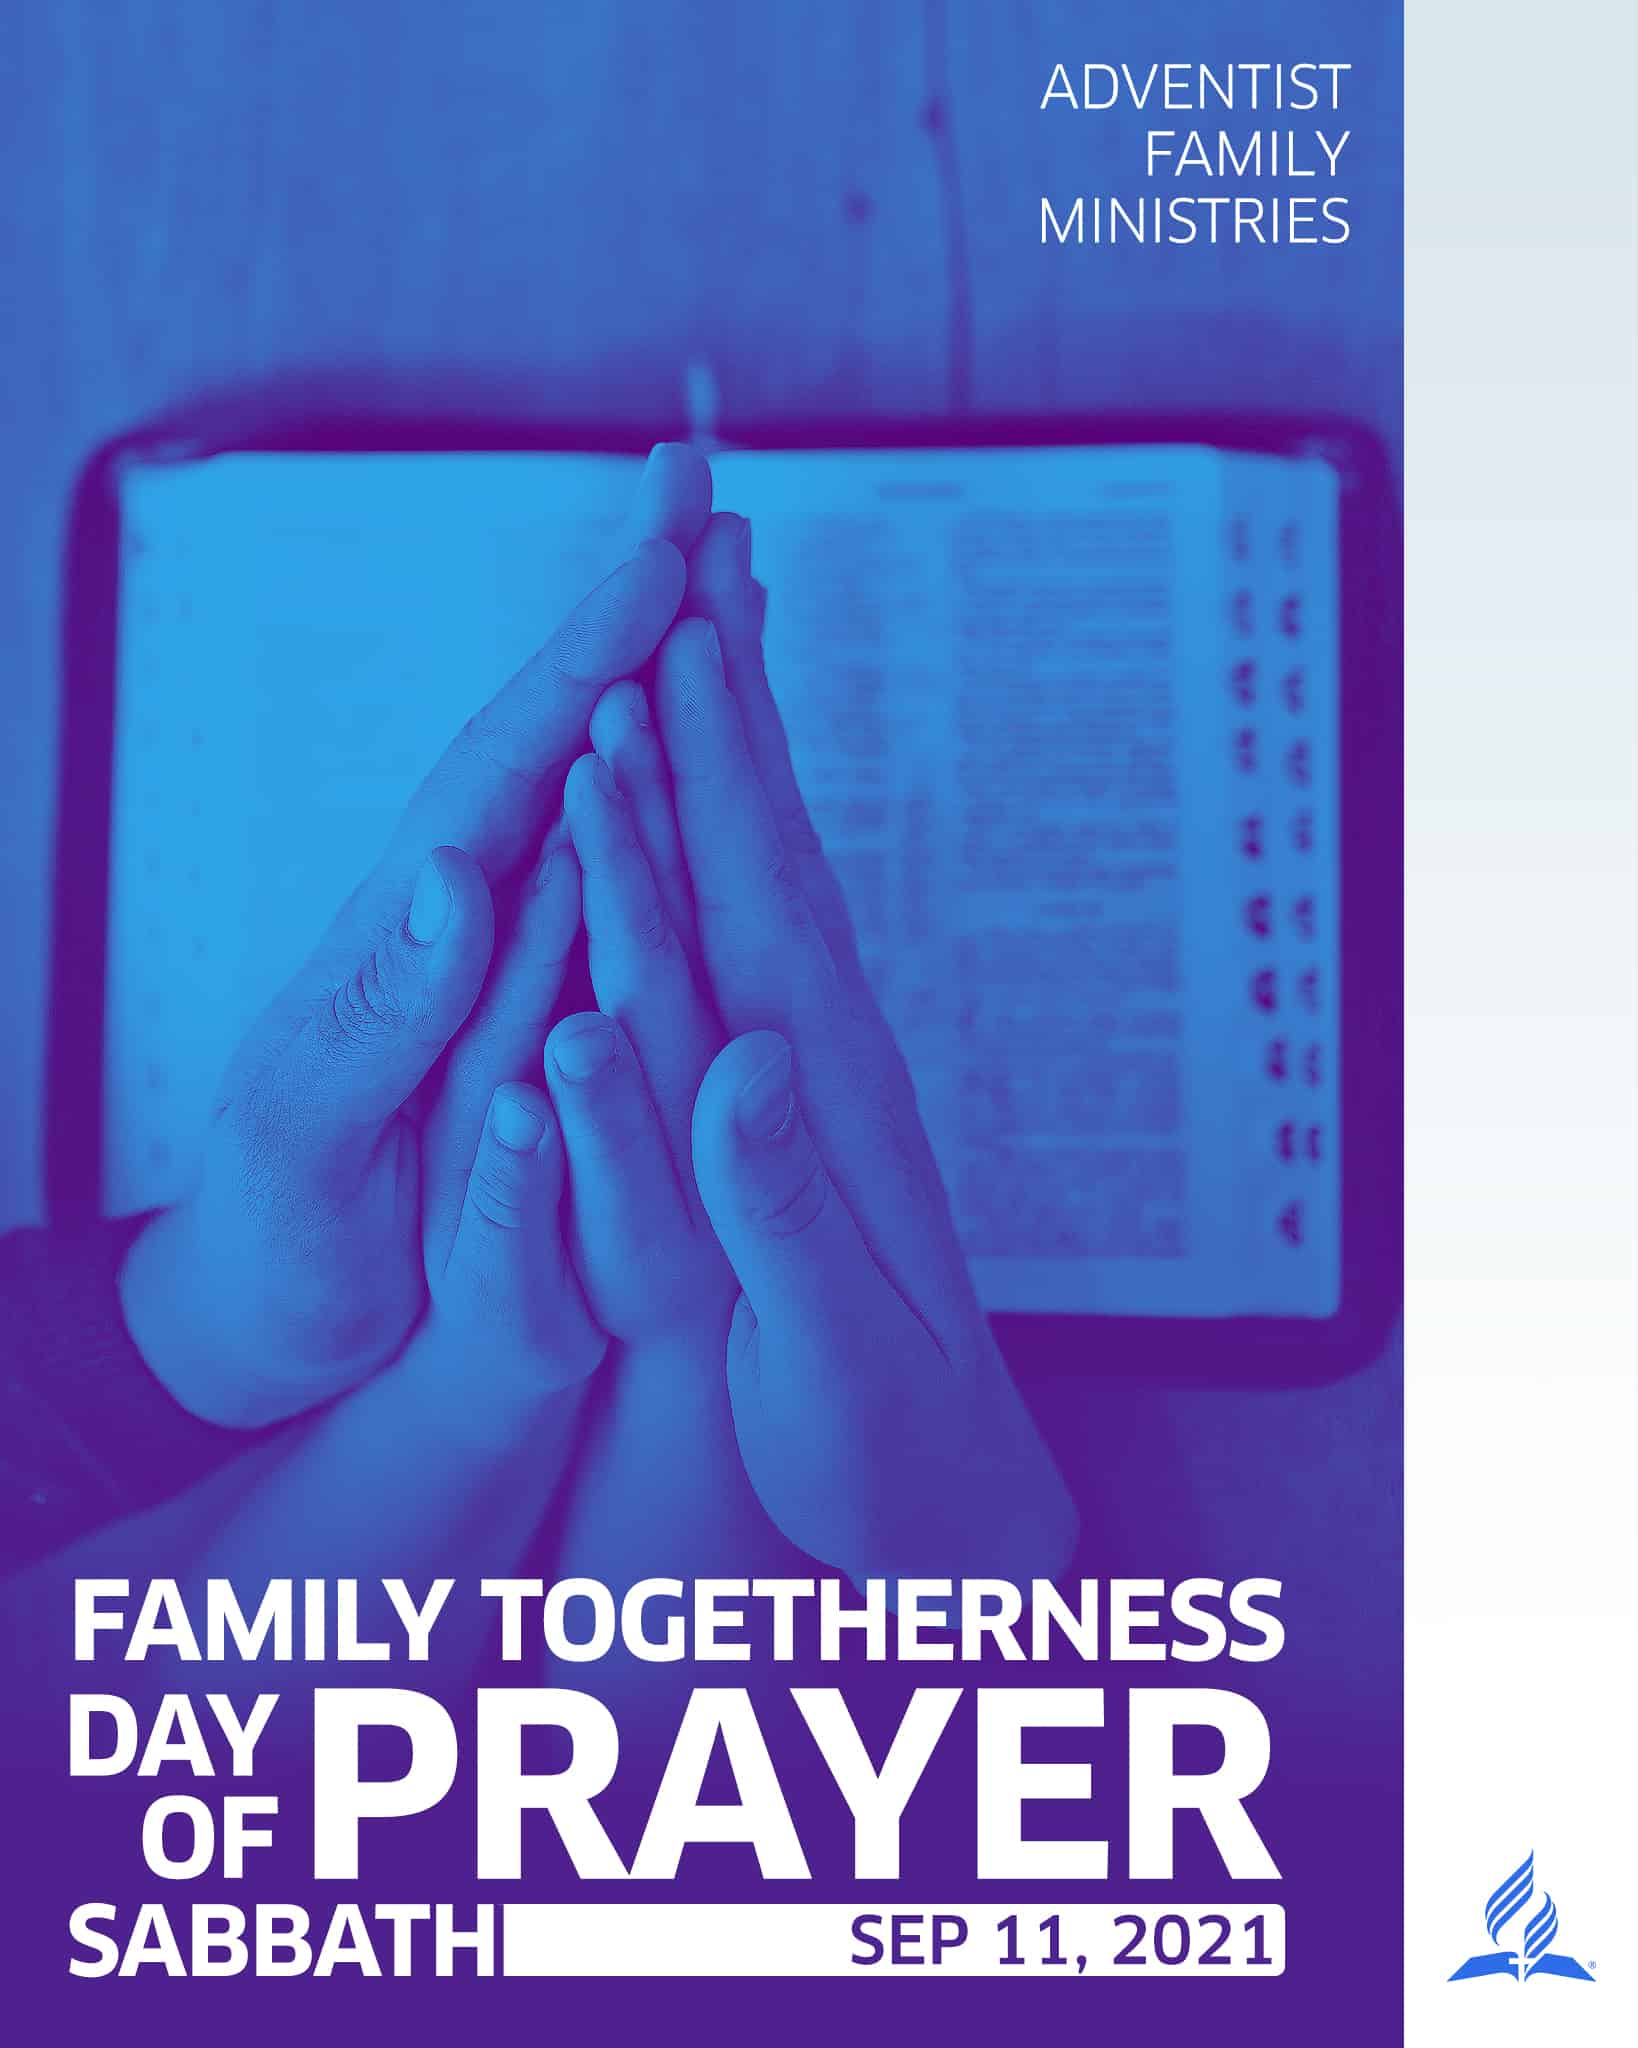 2021 Family Togetherness Week of Prayer Ads Adventist Family Ministries